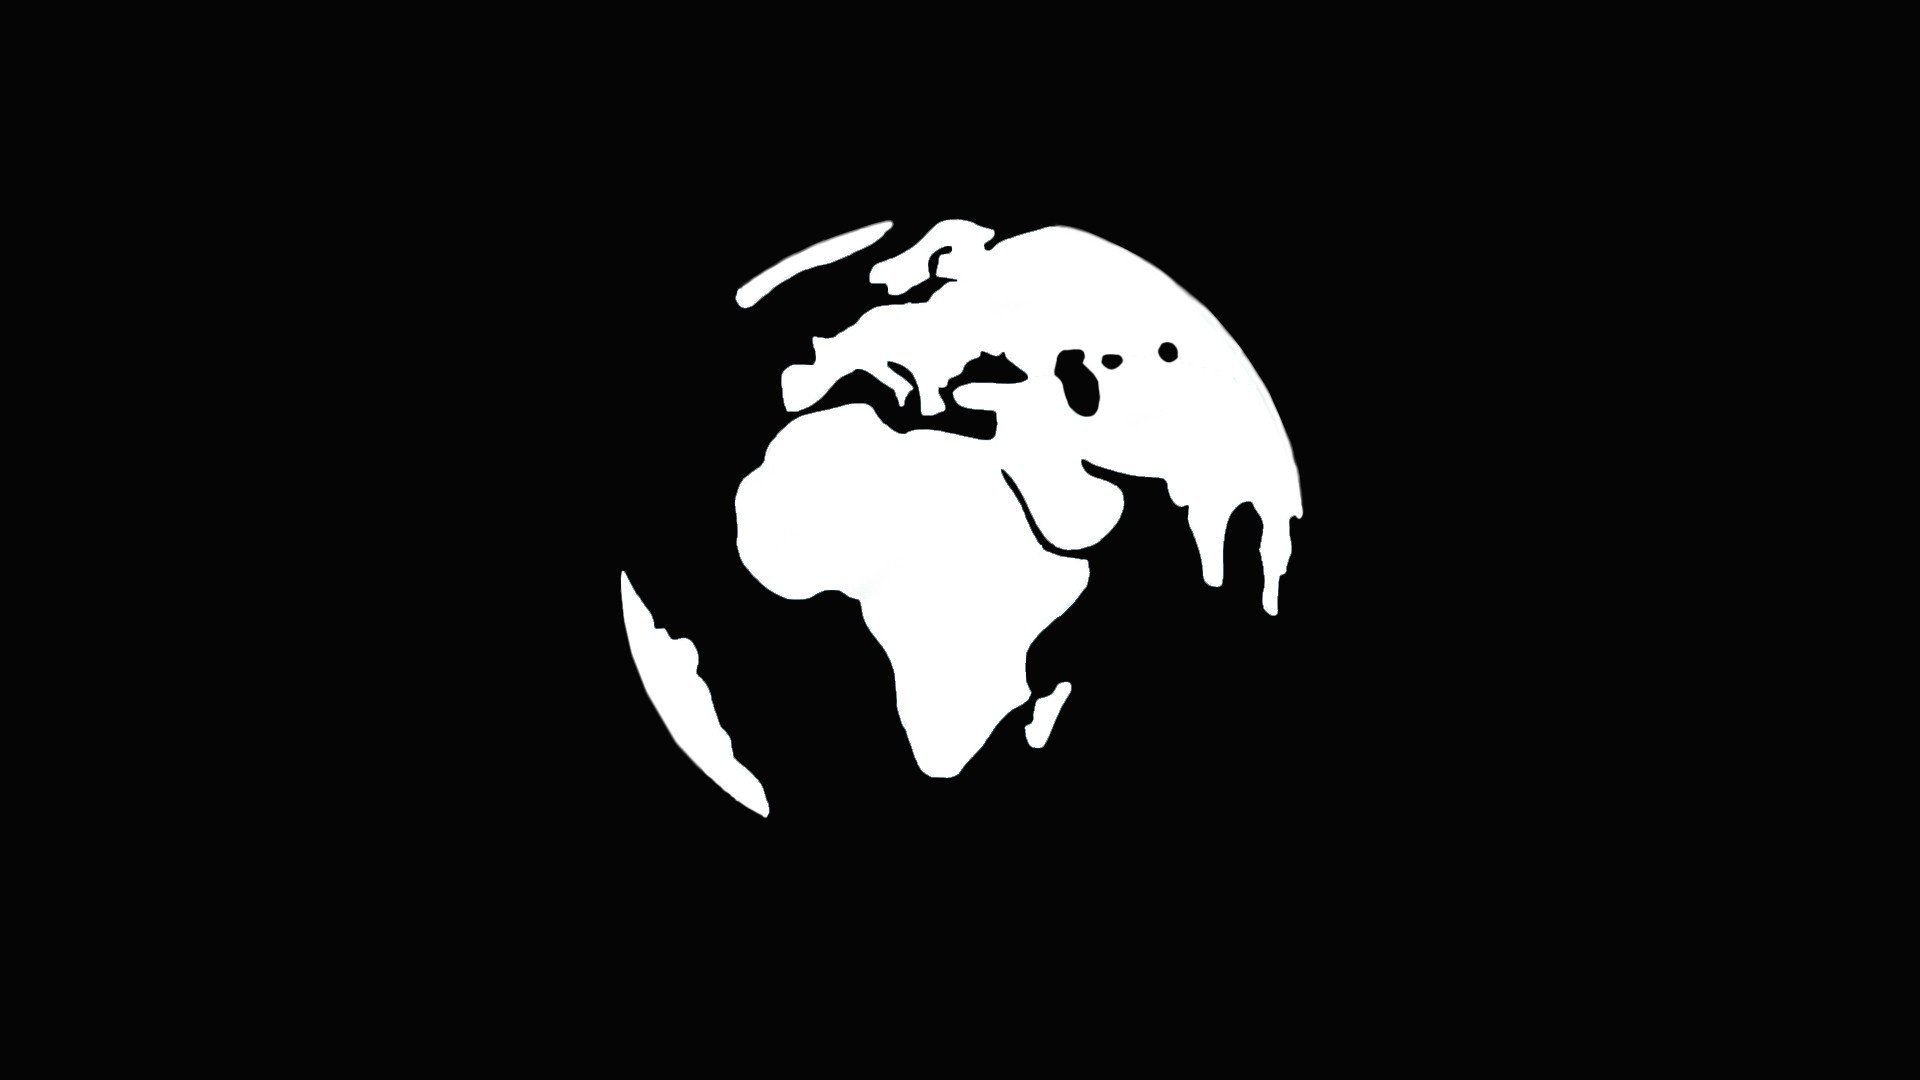 World minimalism simple black white continents Africa Europe globes Earth black background AsiaSouth America map wallpaperx1080